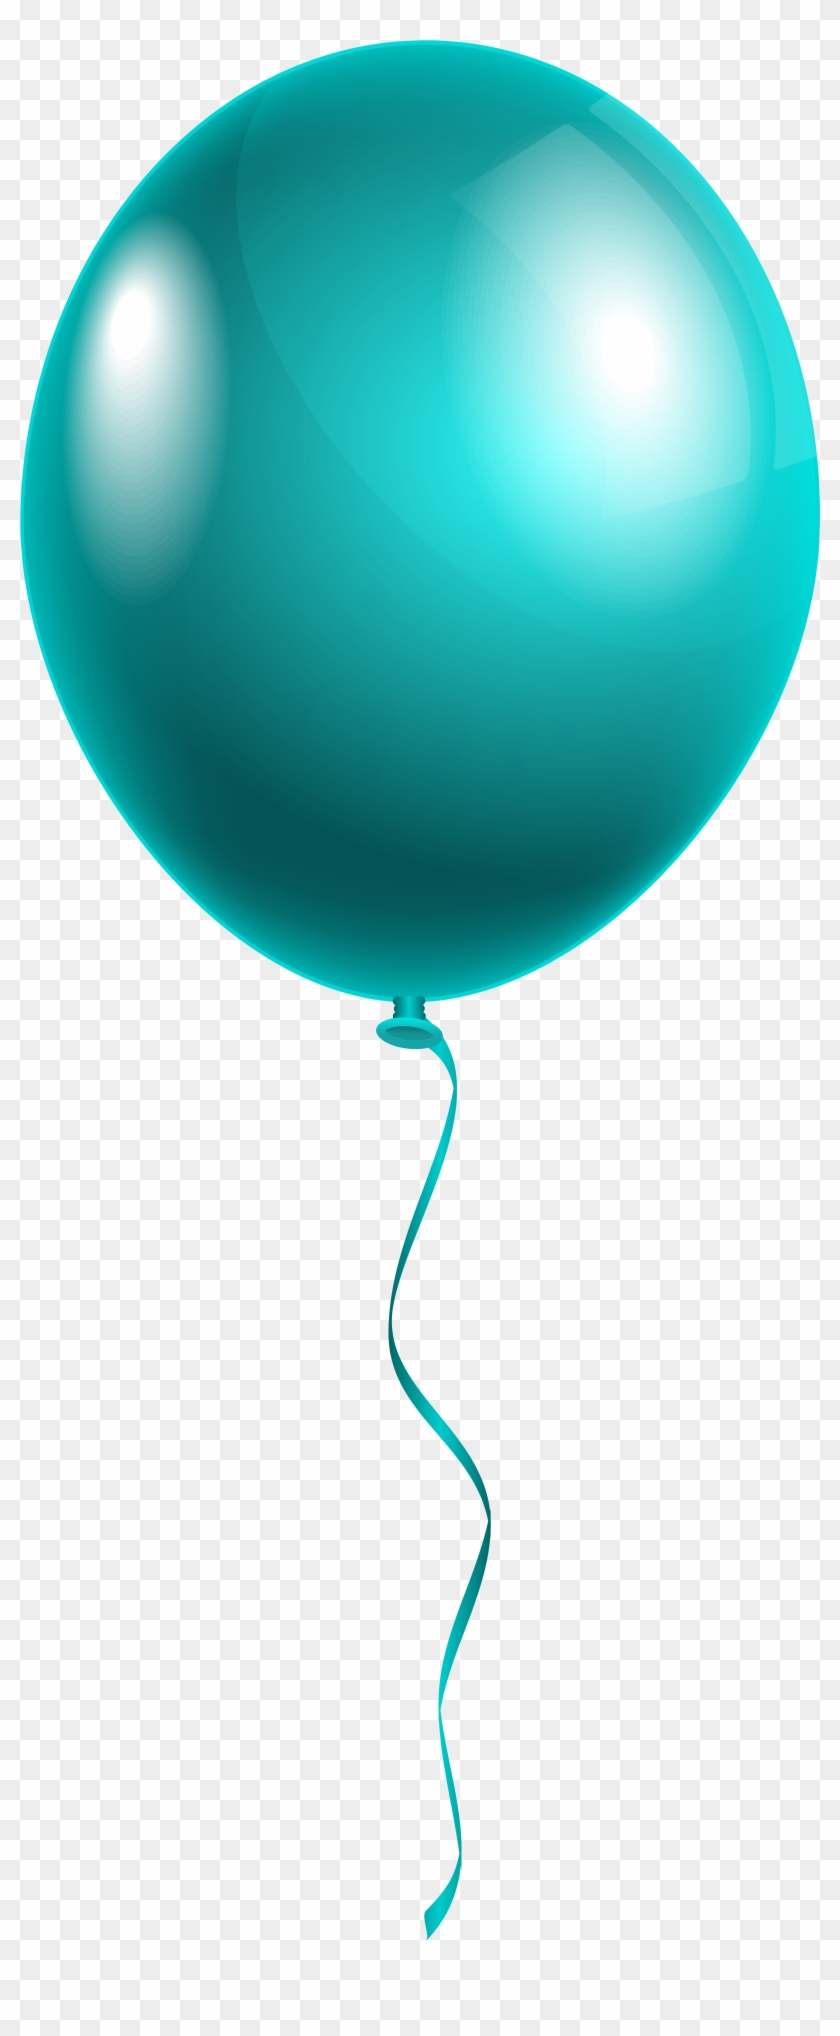 Single Modern Blue Balloon Png Clipart Image - Single Balloons Png #275152